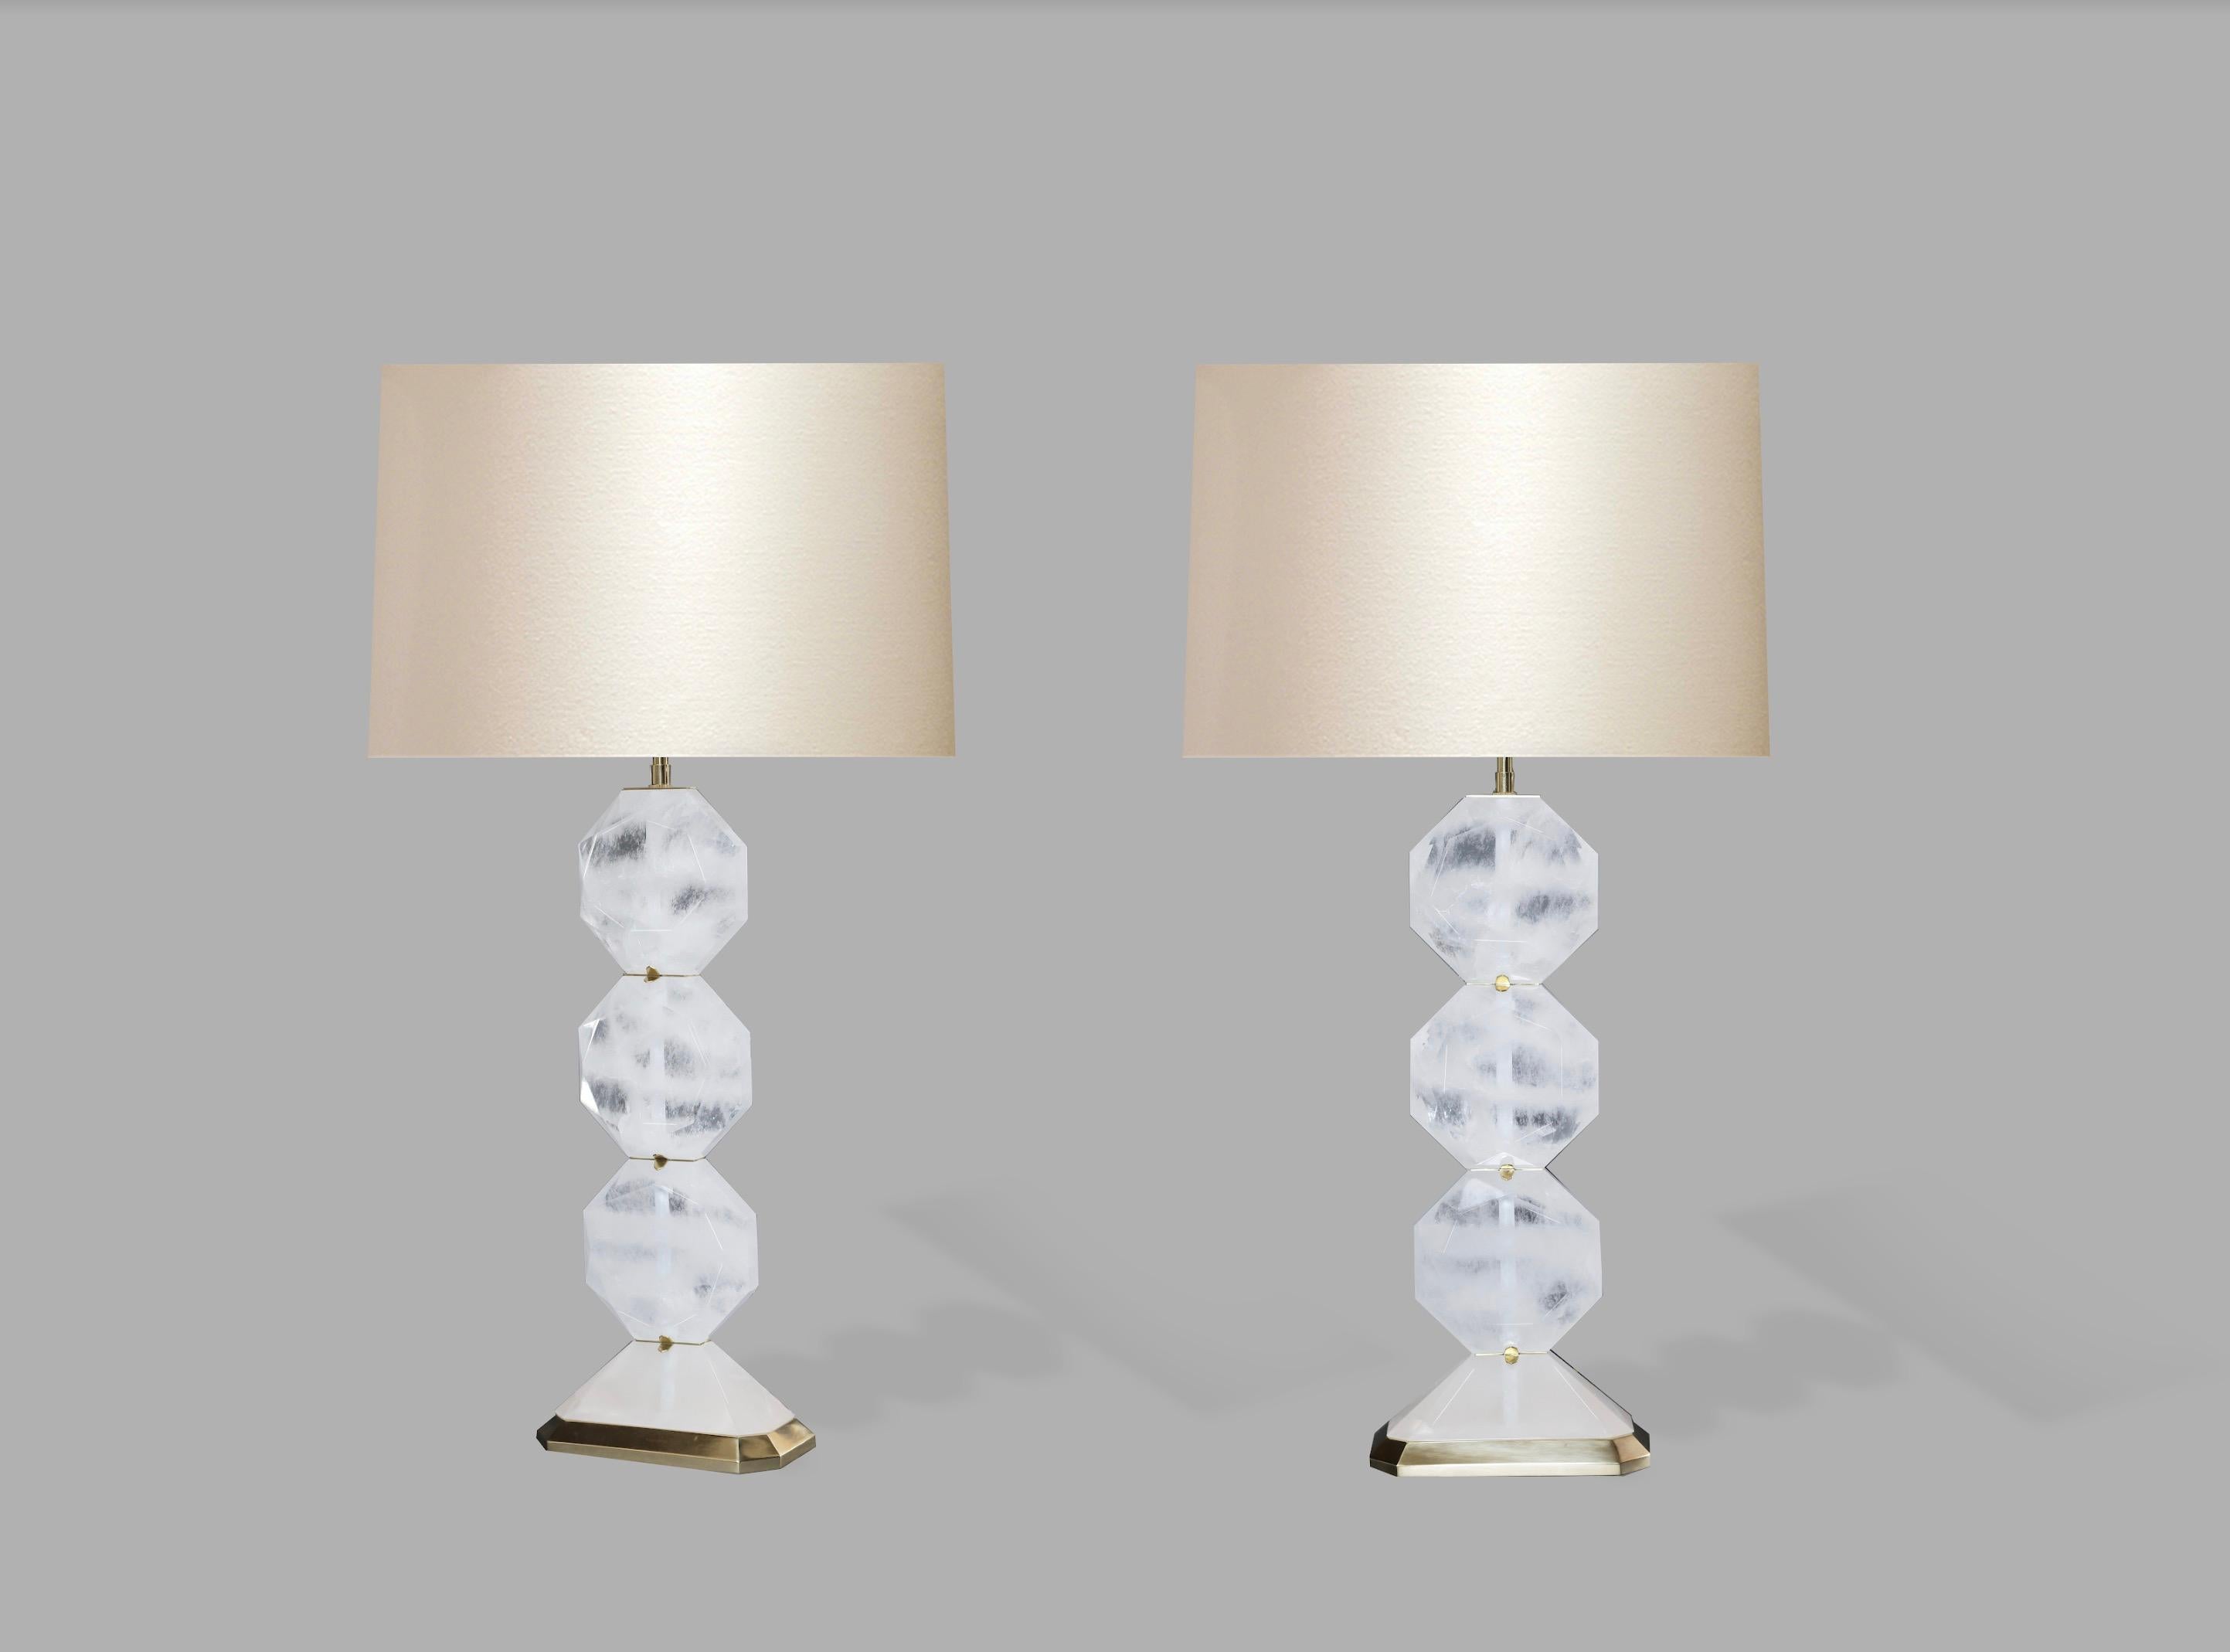 Carved diamond-form triple-stacked rock crystal lamps with polished brass base and inserted decoration.crated by Phoenix gallery 
Measure: 21.5